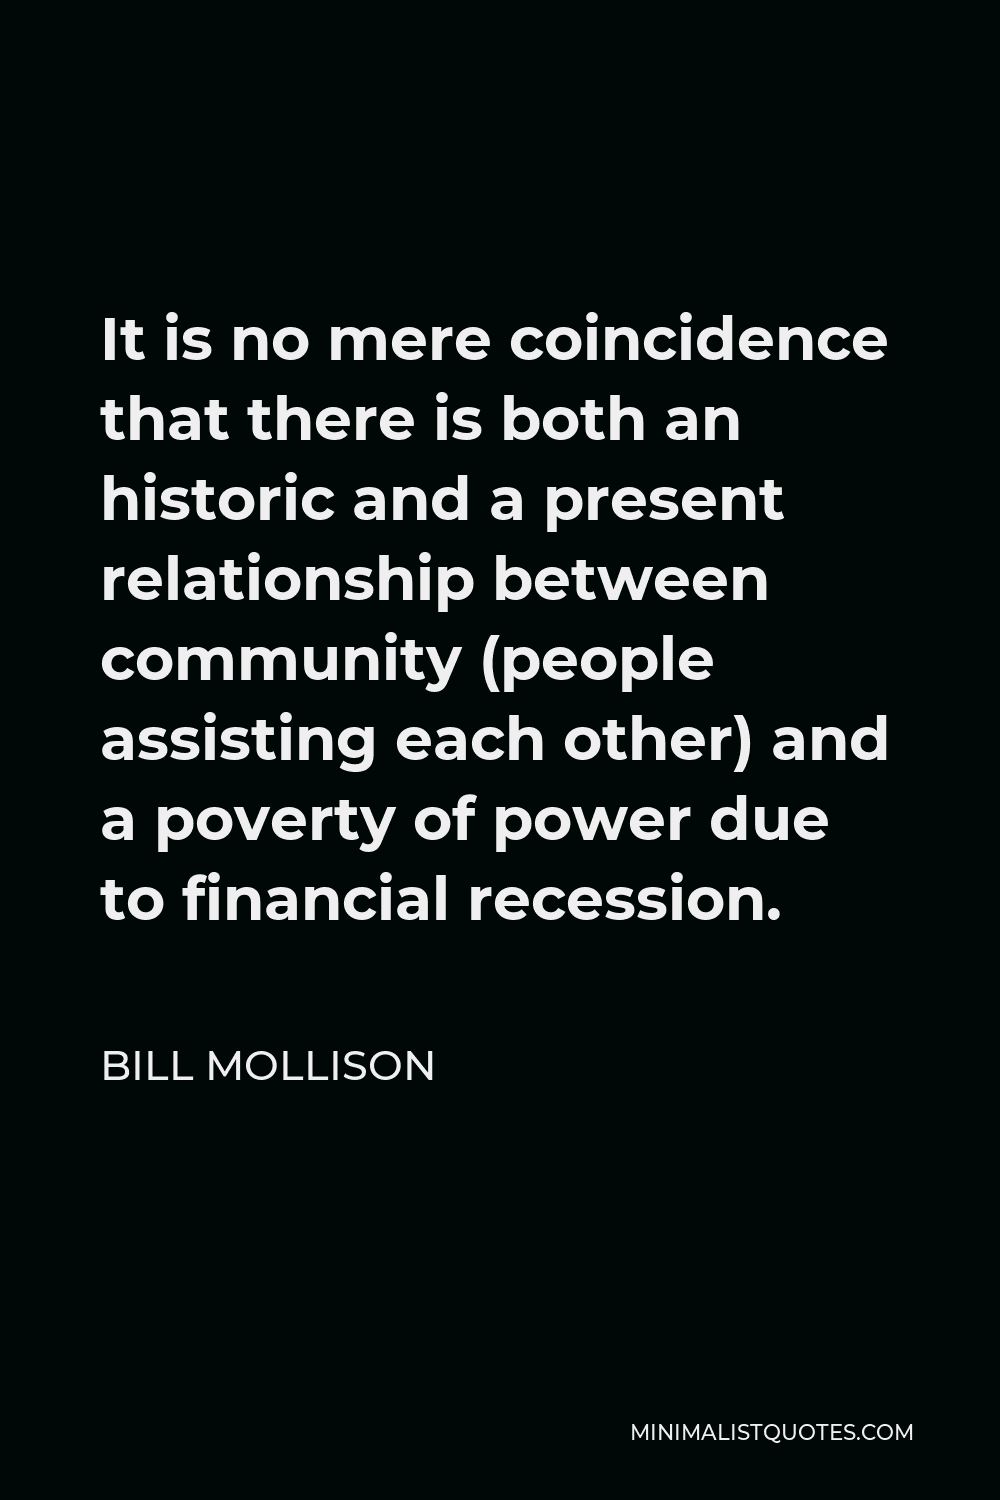 Bill Mollison Quote - It is no mere coincidence that there is both an historic and a present relationship between community (people assisting each other) and a poverty of power due to financial recession.